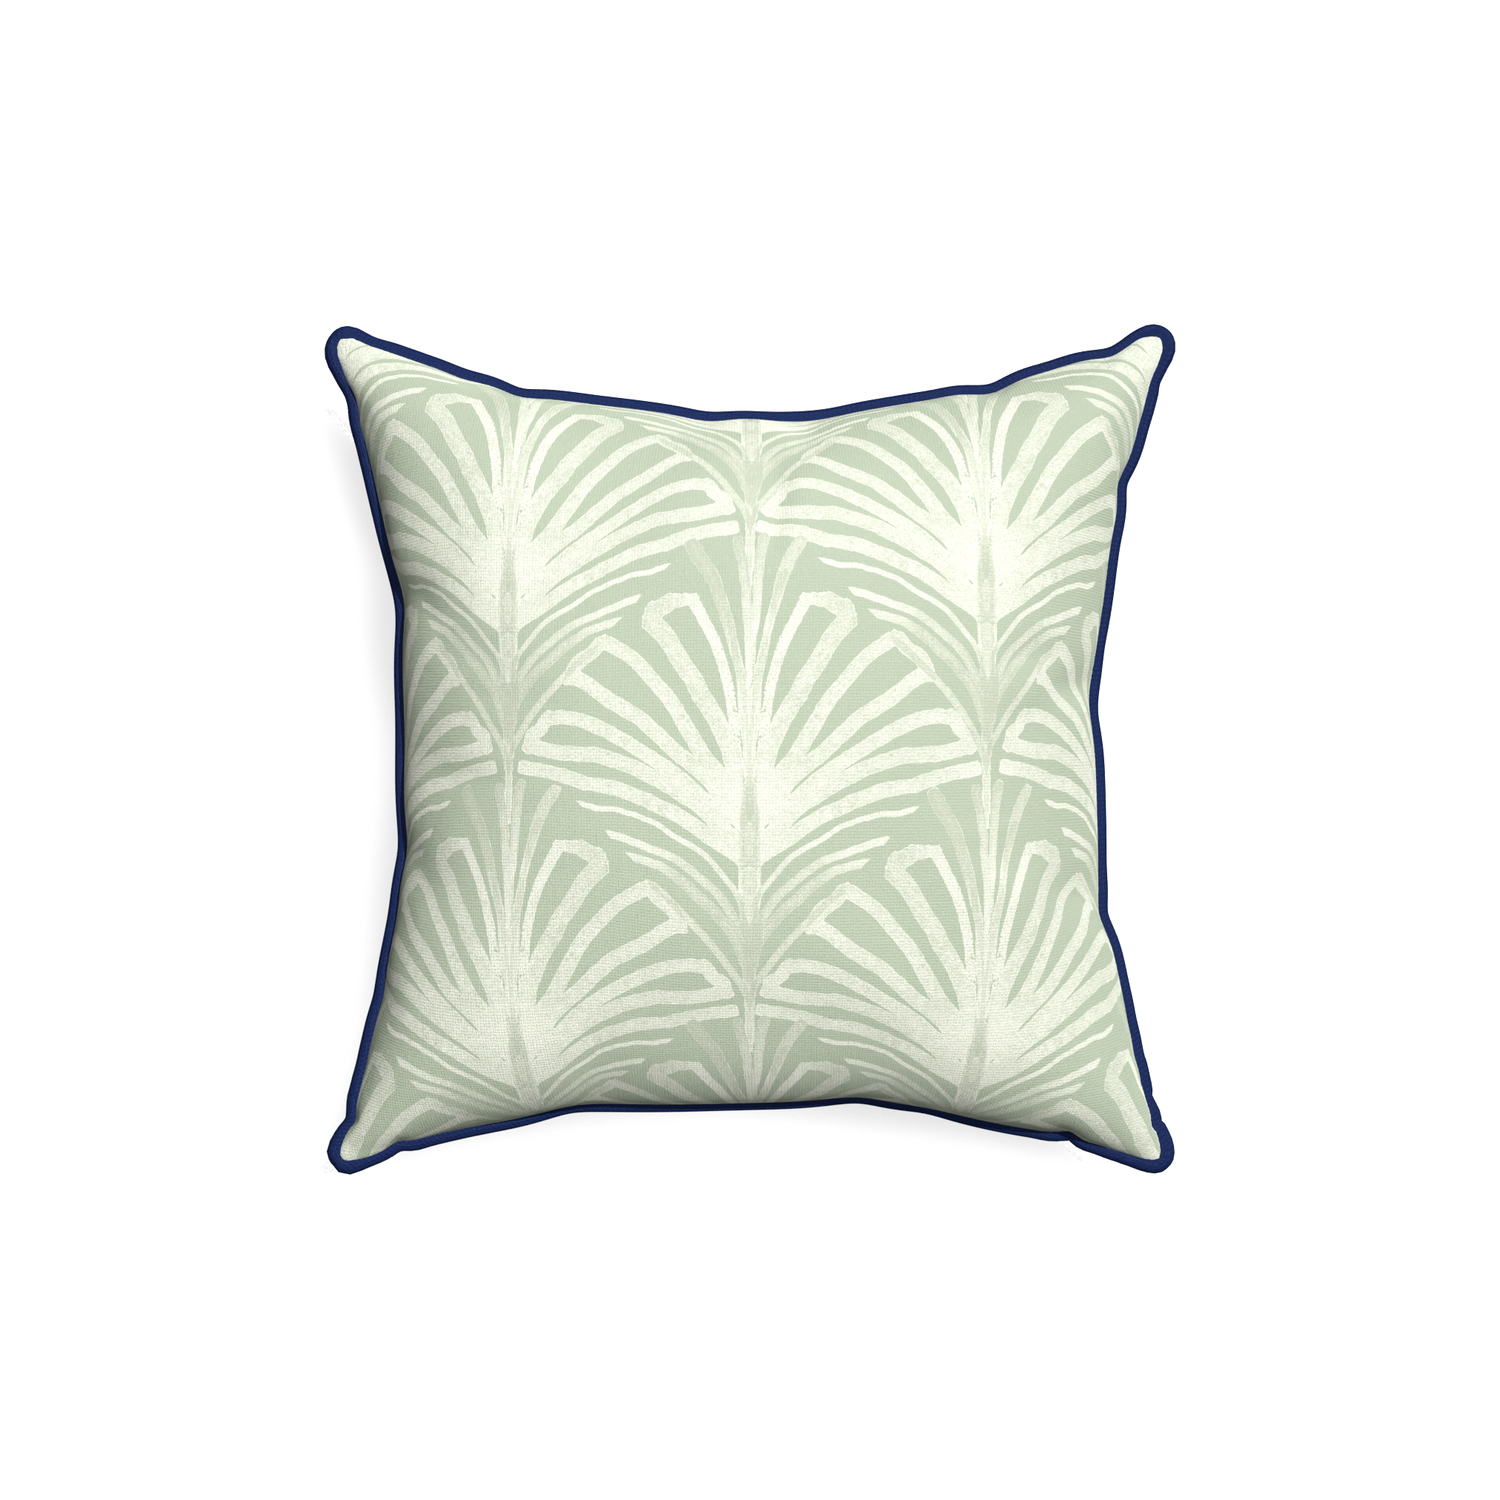 18-square suzy sage custom sage green palmpillow with midnight piping on white background